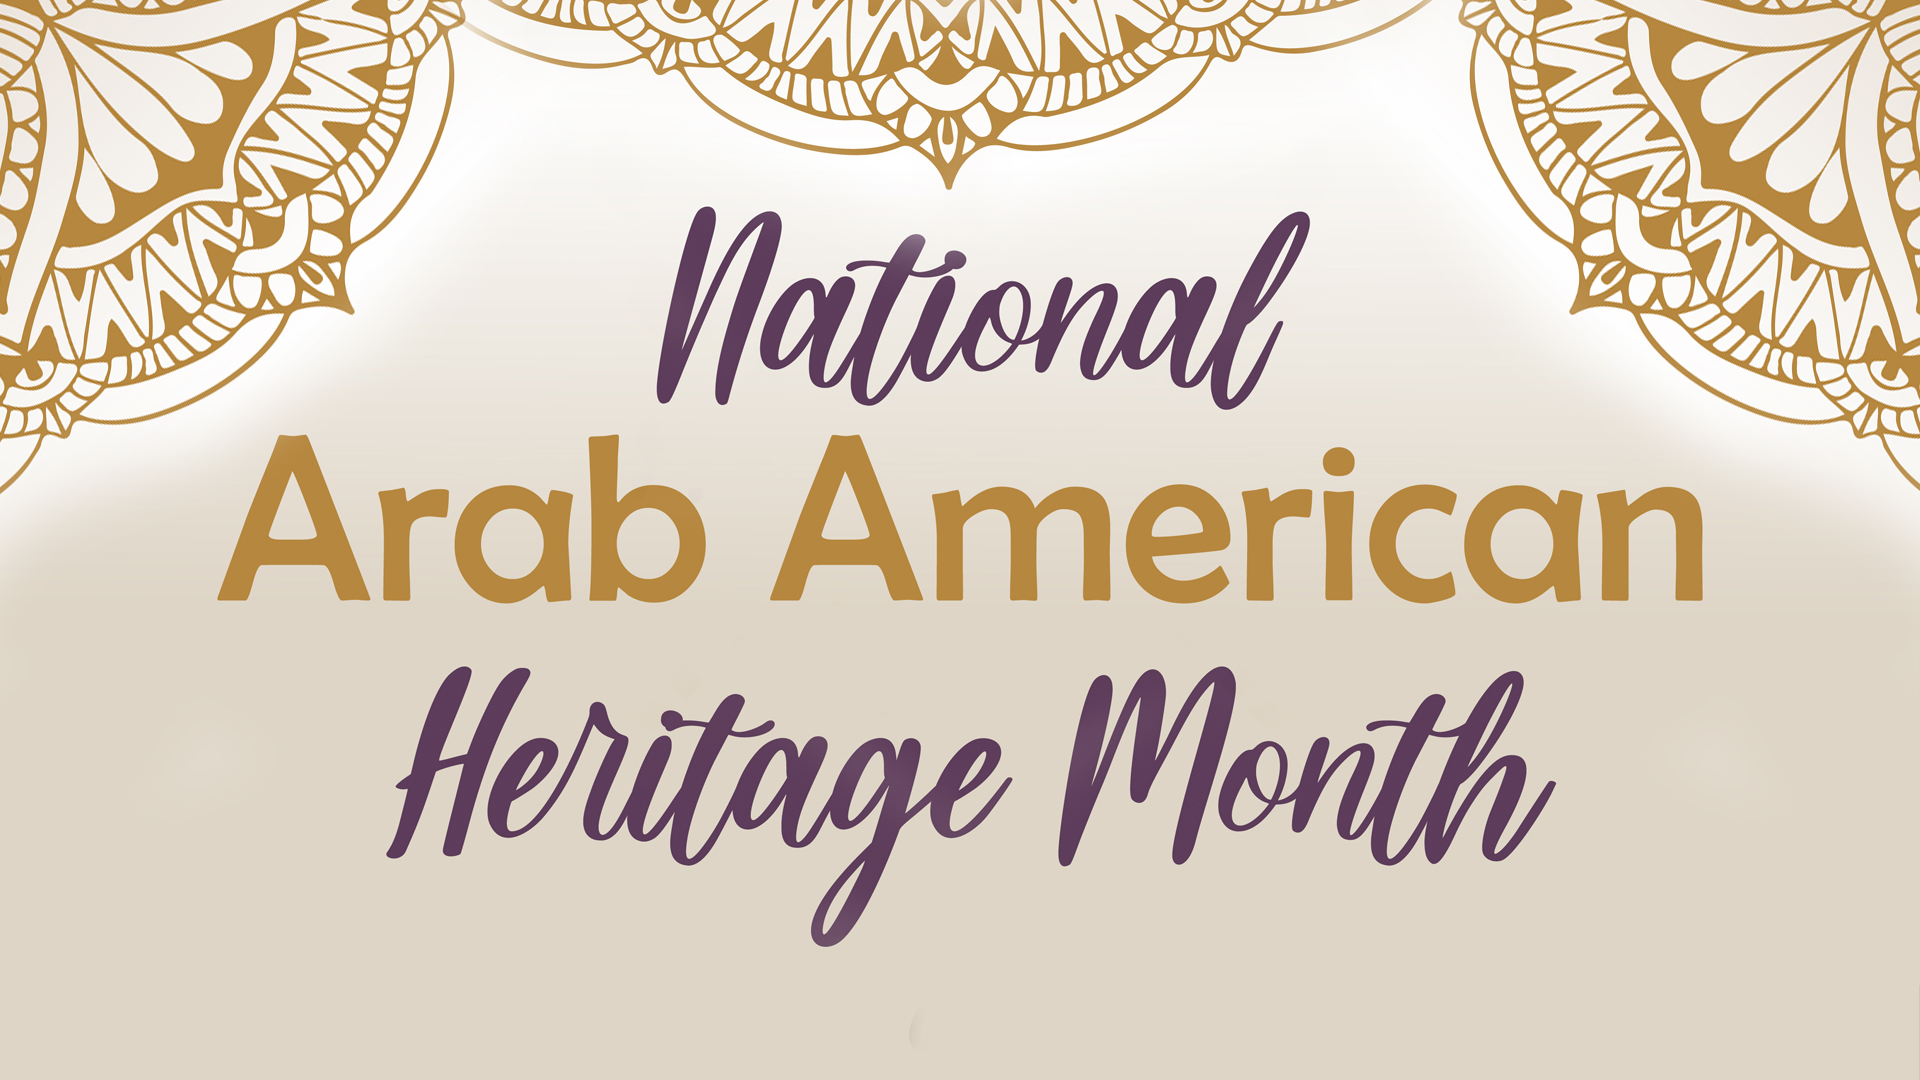 White and gold themed image with text saying "National Arab American Heritage Month"